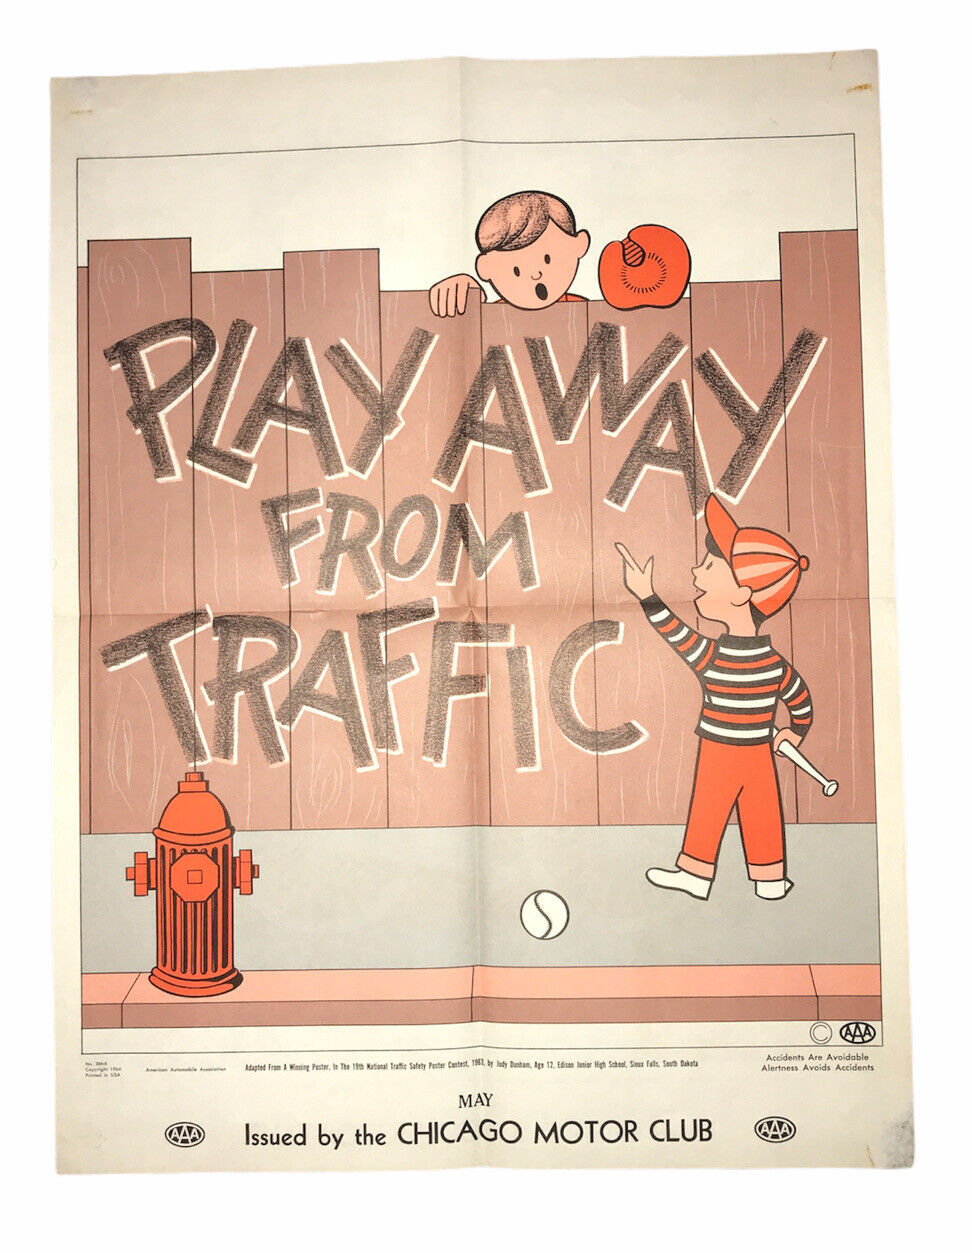 AAA Chicago Motor Club “Play Away From Traffic” 2 Sided Safety Poster 1964